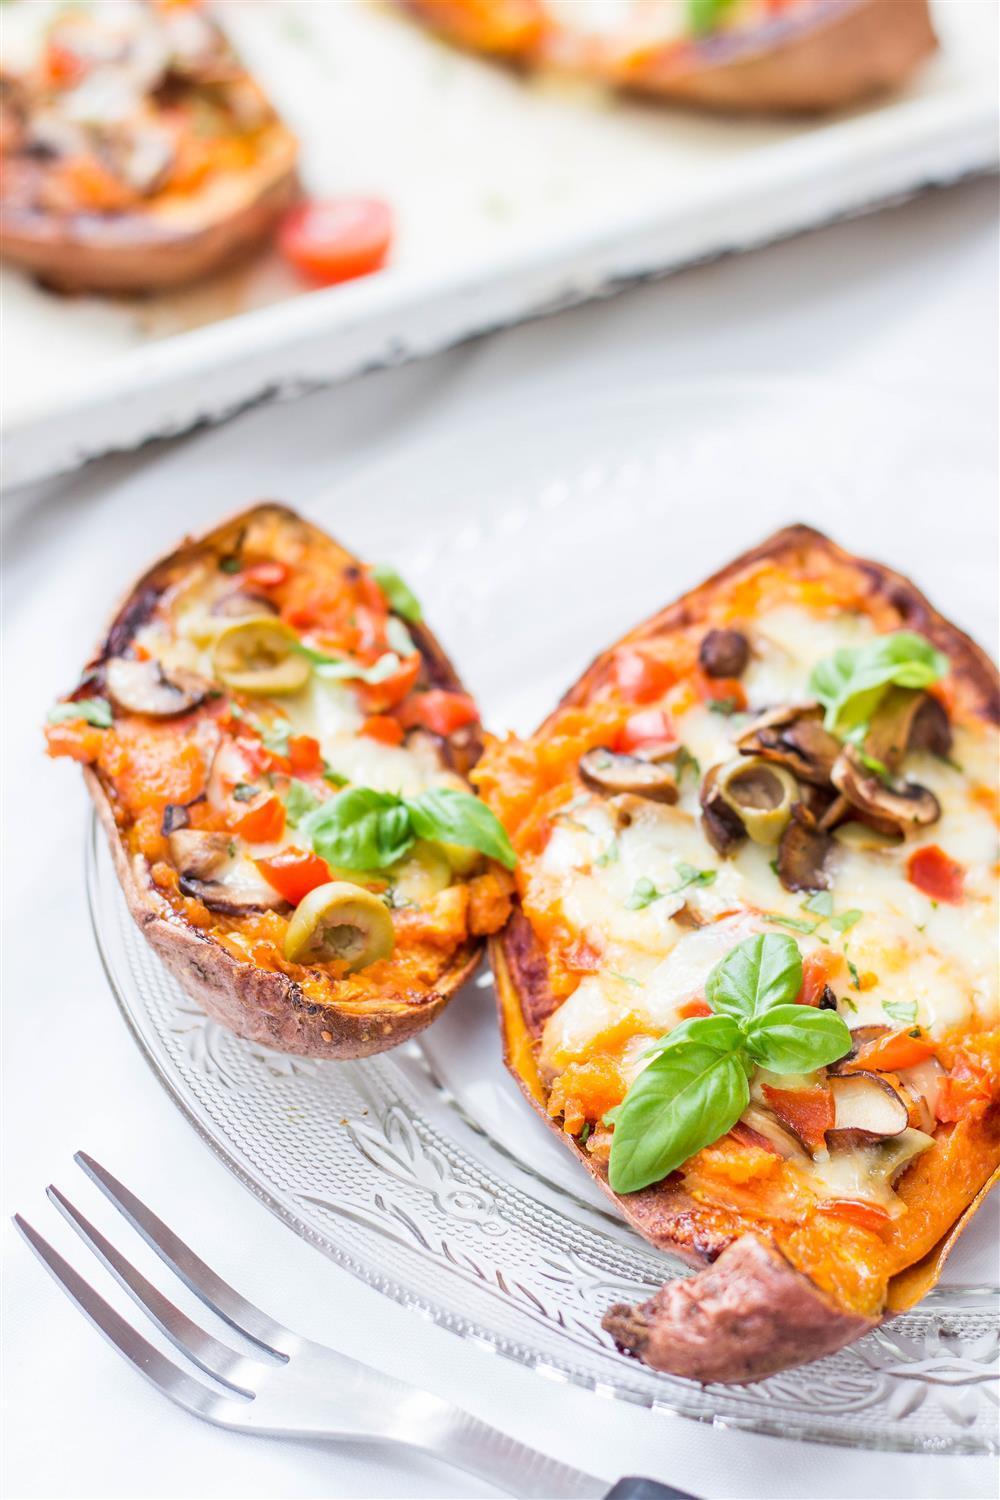 Use Your Noodles - Pizza Stuffed Sweet Potatoes